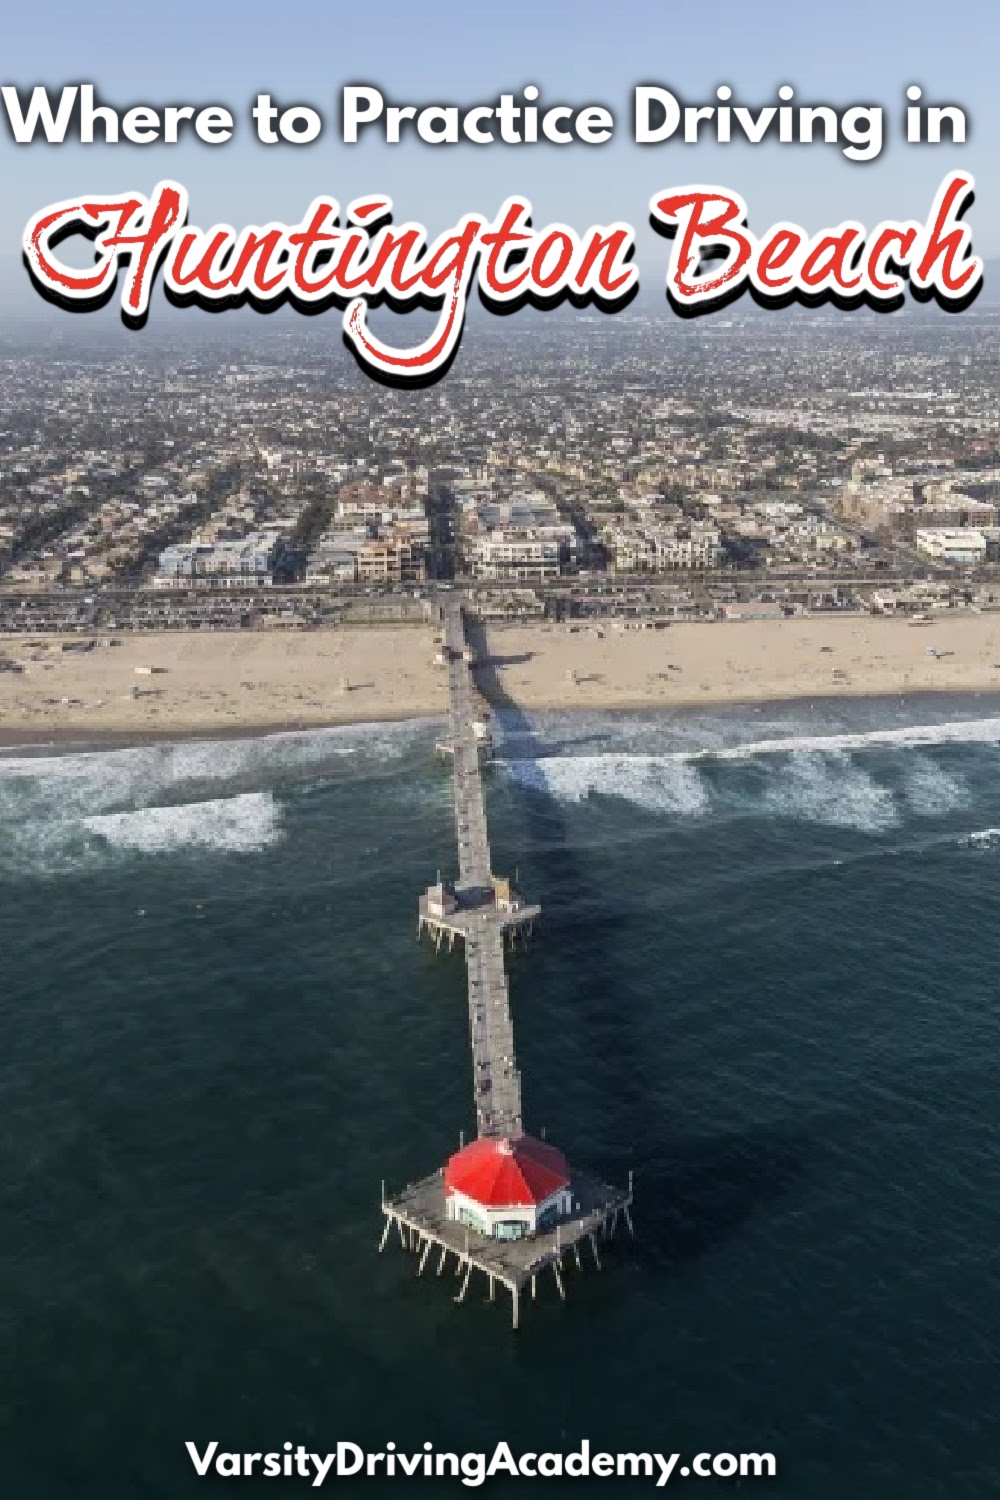 Knowing where to practice driving in Huntington Beach is a good way to make sure you improve your driving skills without much risk.